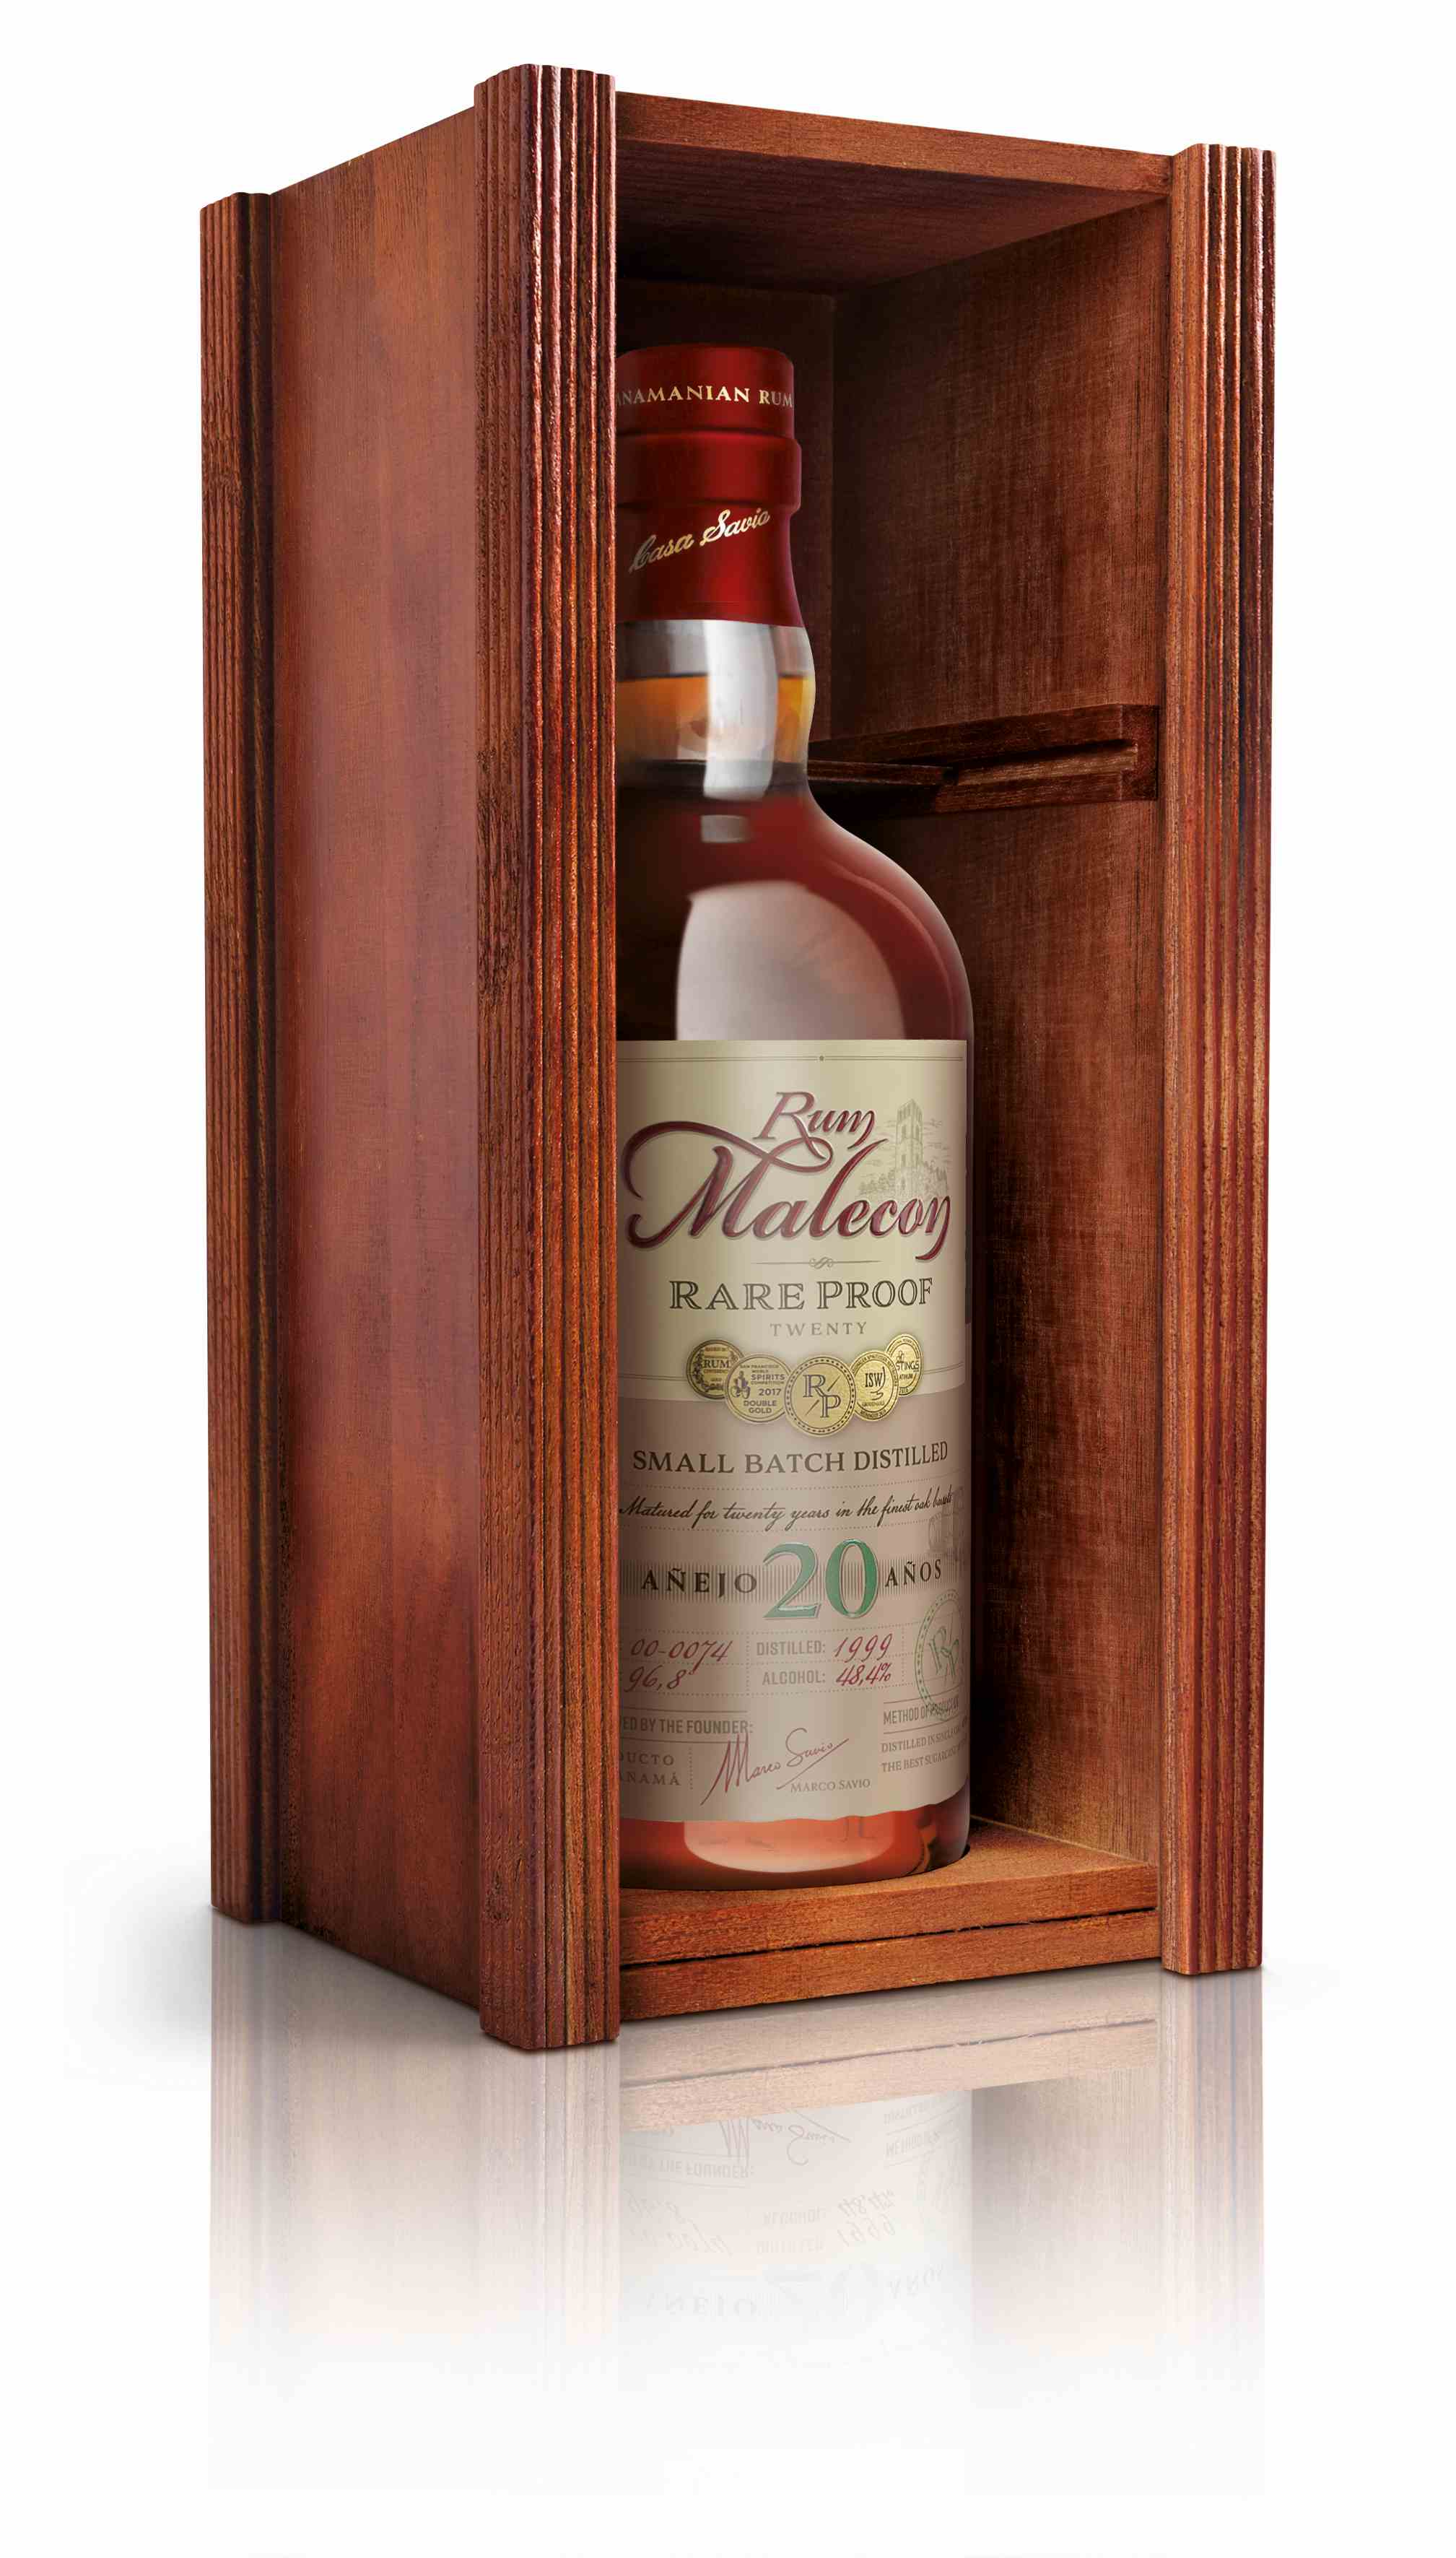 Malecon Rare Proof 20 Years Small Batch